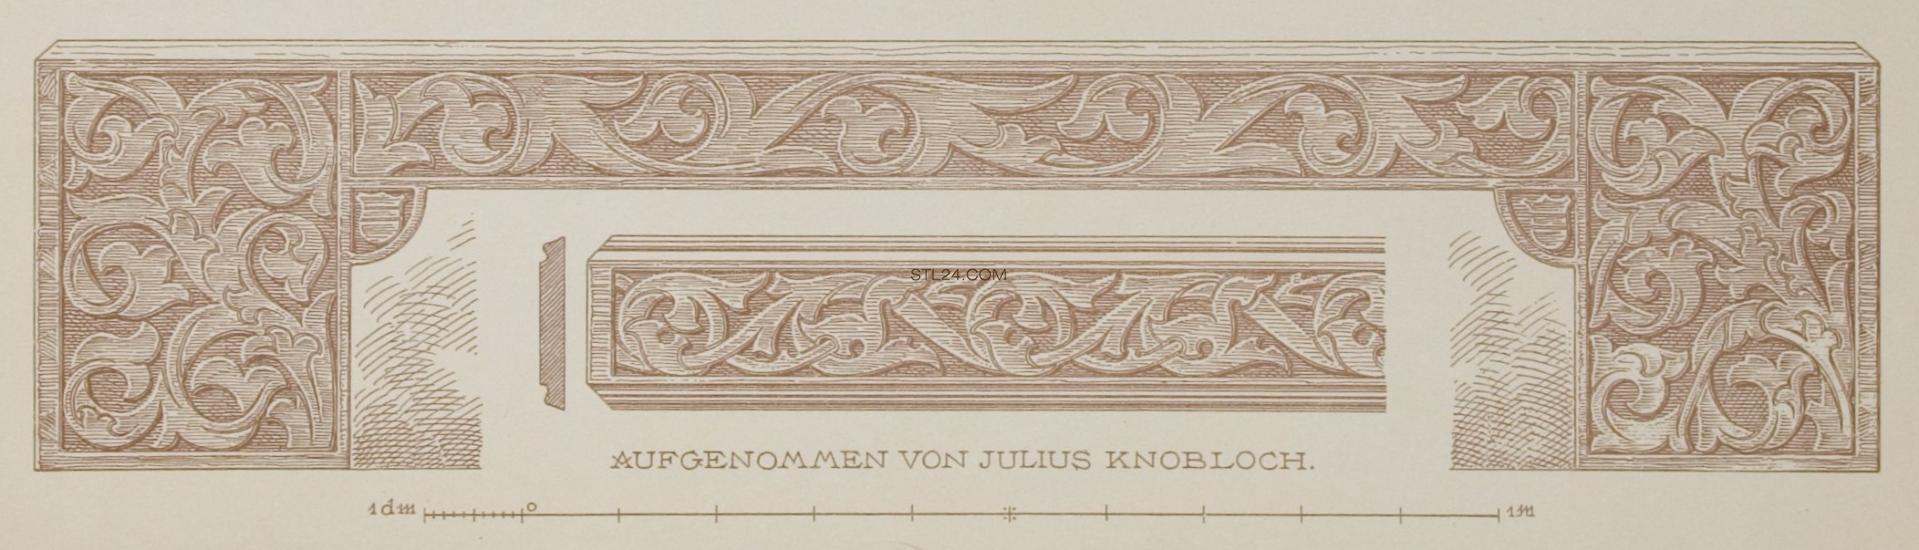 CARVED PANEL_1877